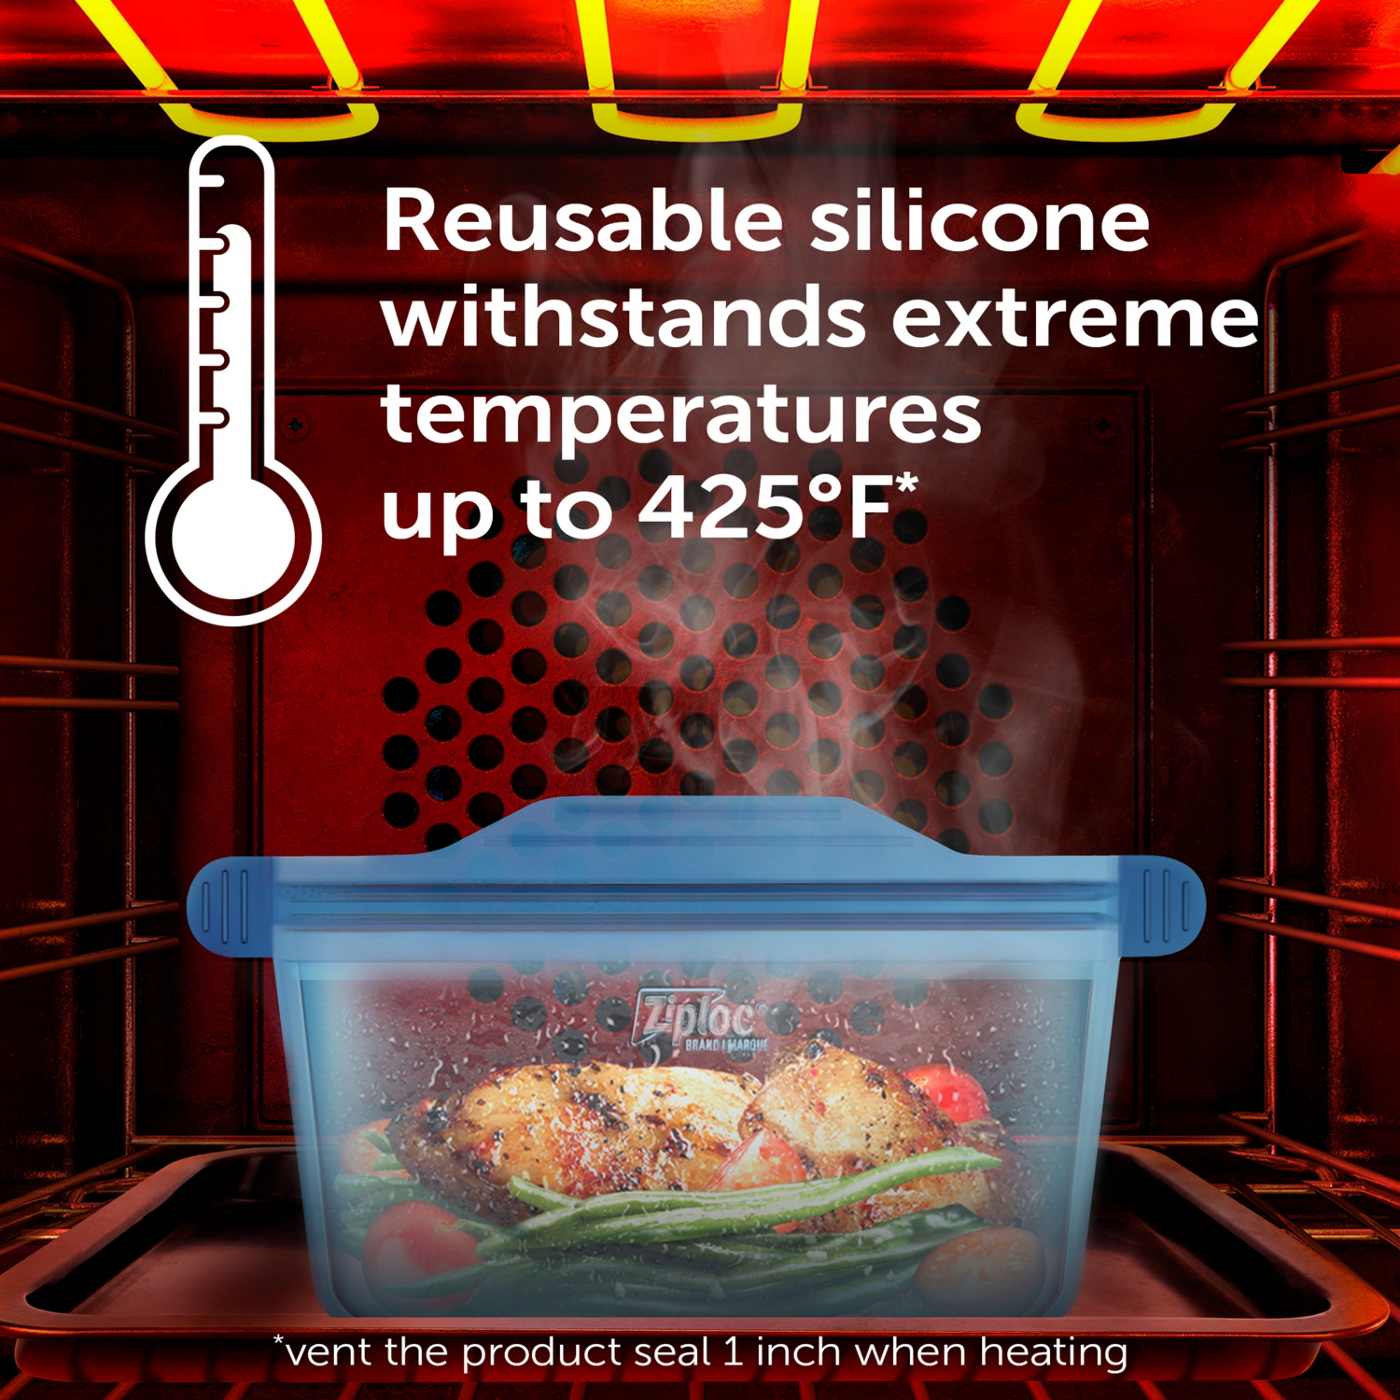 Ziploc Ziploc Endurables Medium Reusable Silicone Container - Safe for Microwave and Freezer - 32 fl oz; image 4 of 4